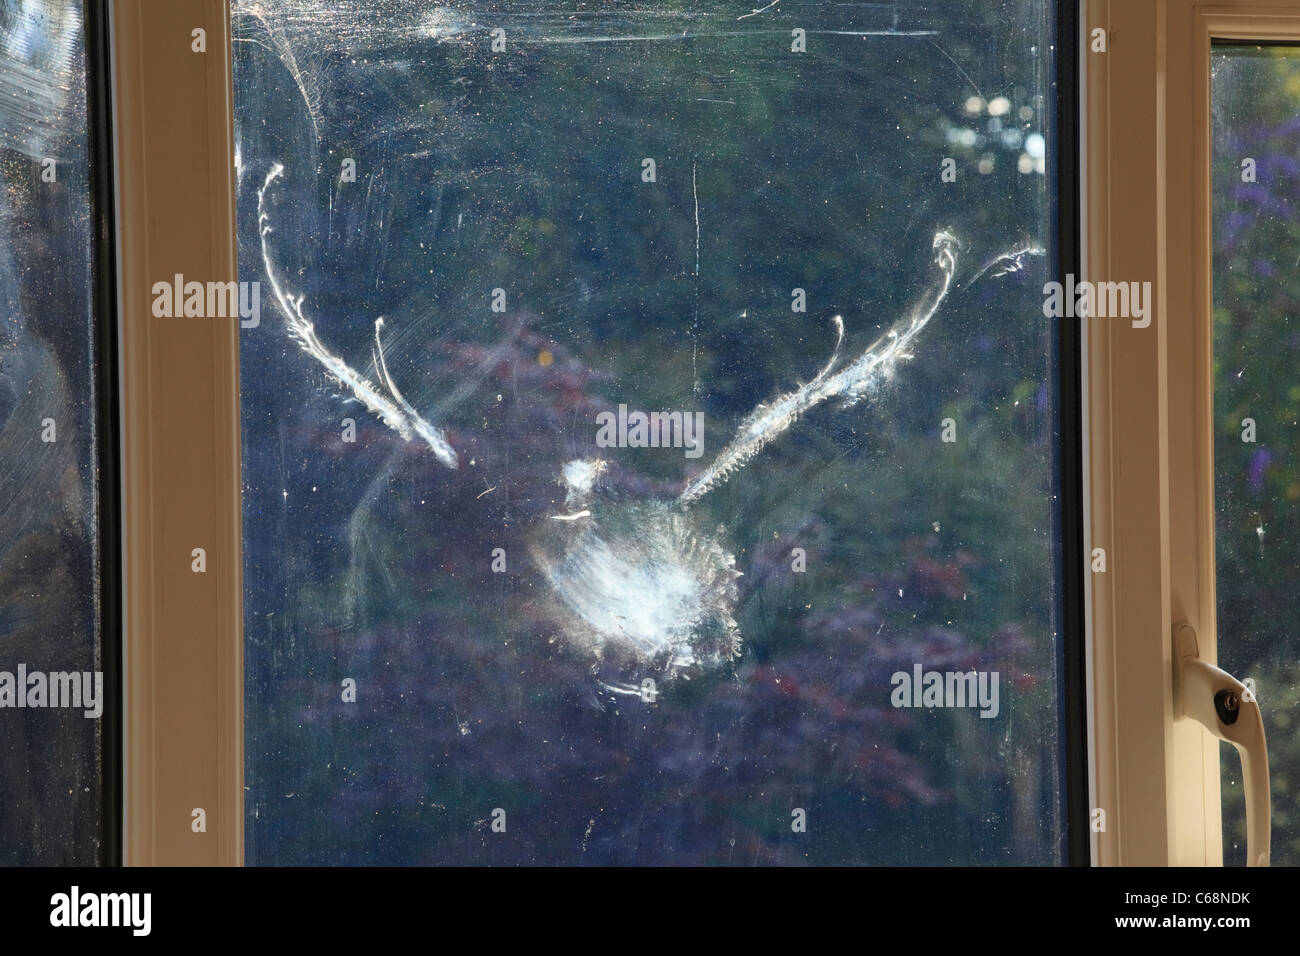 Bird mark outline in shape of a Wood pigeon Columba palumbus having flown into a glass window seen from inside. UK, Britain. Stock Photo